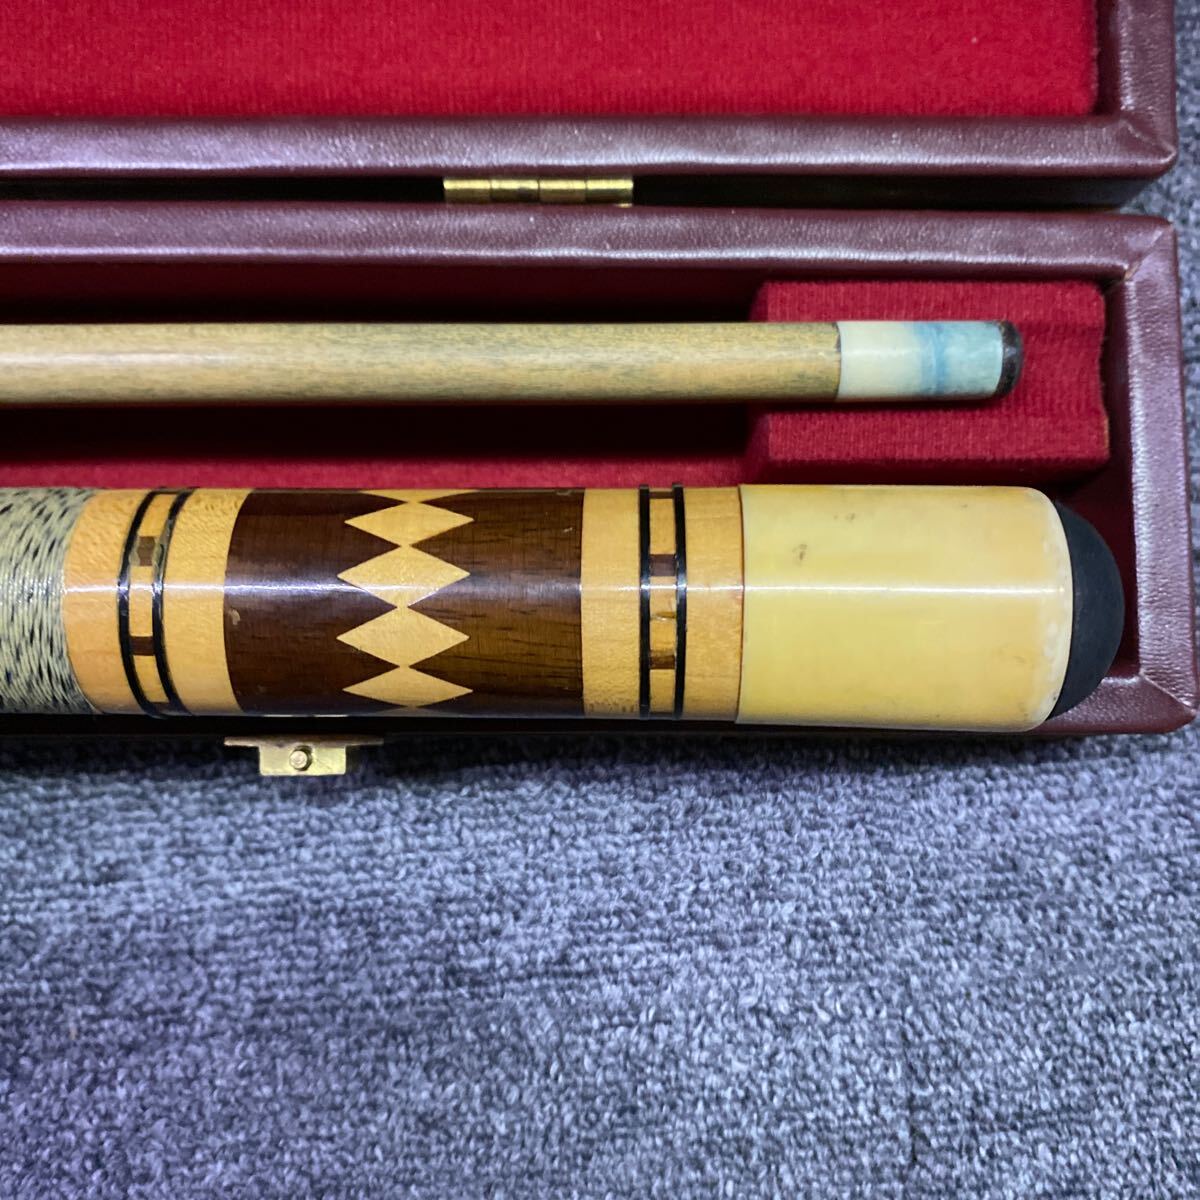 04412 [ used ][ details unknown ] billiards cue hard case attaching present condition goods 